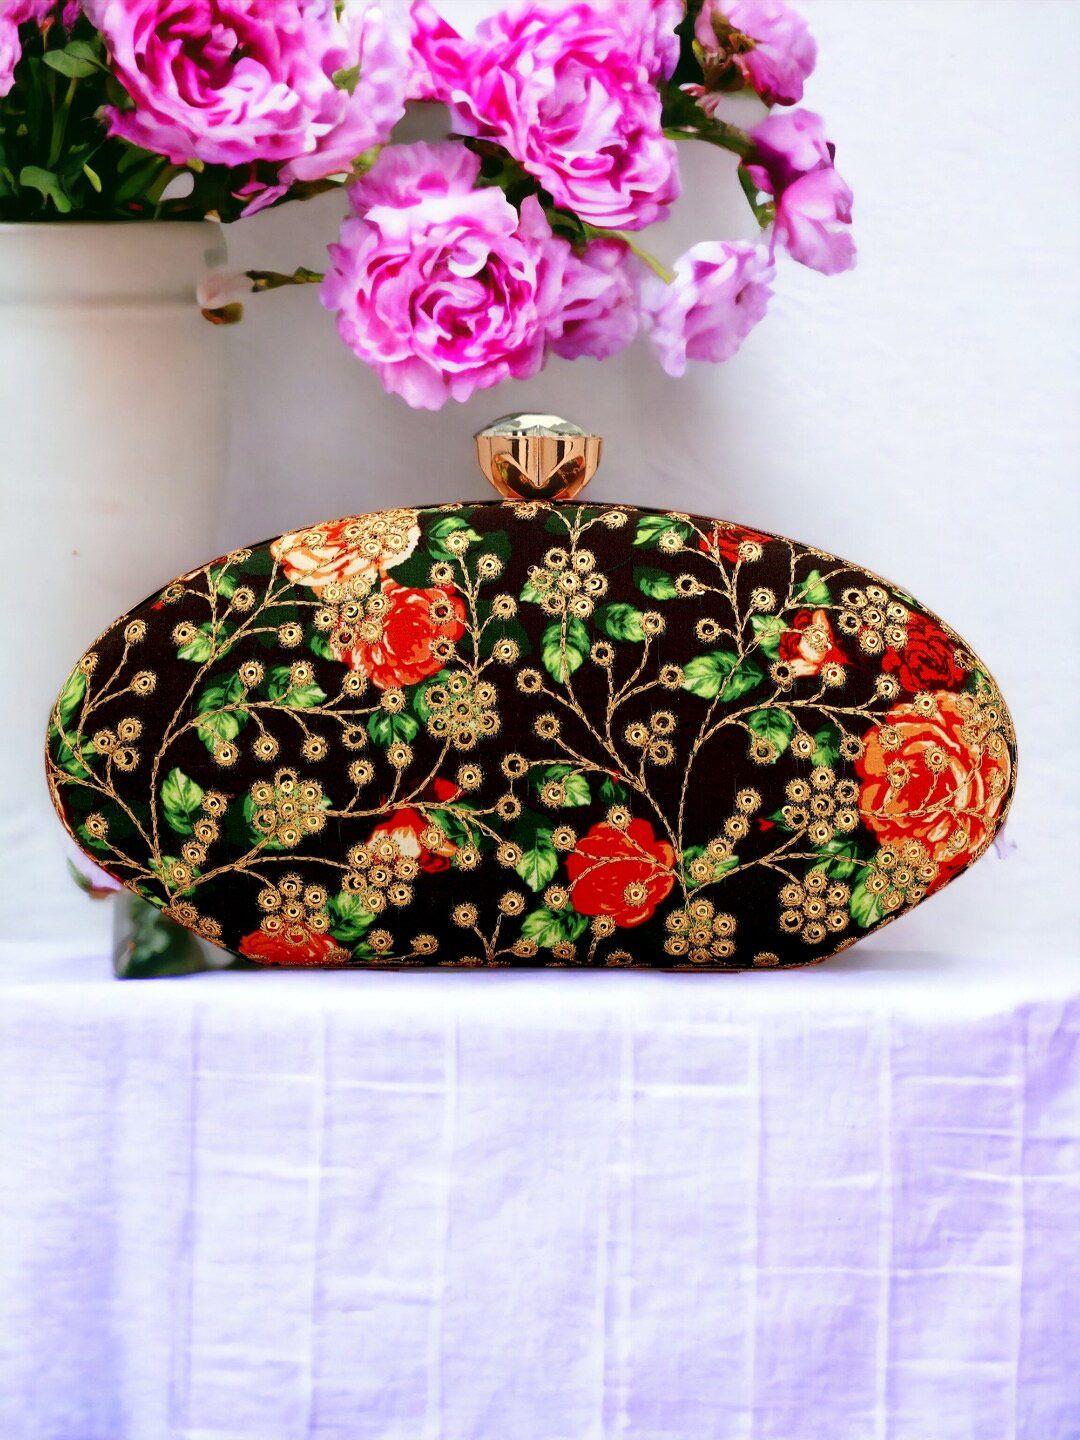 toobacraft embroidered box clutch